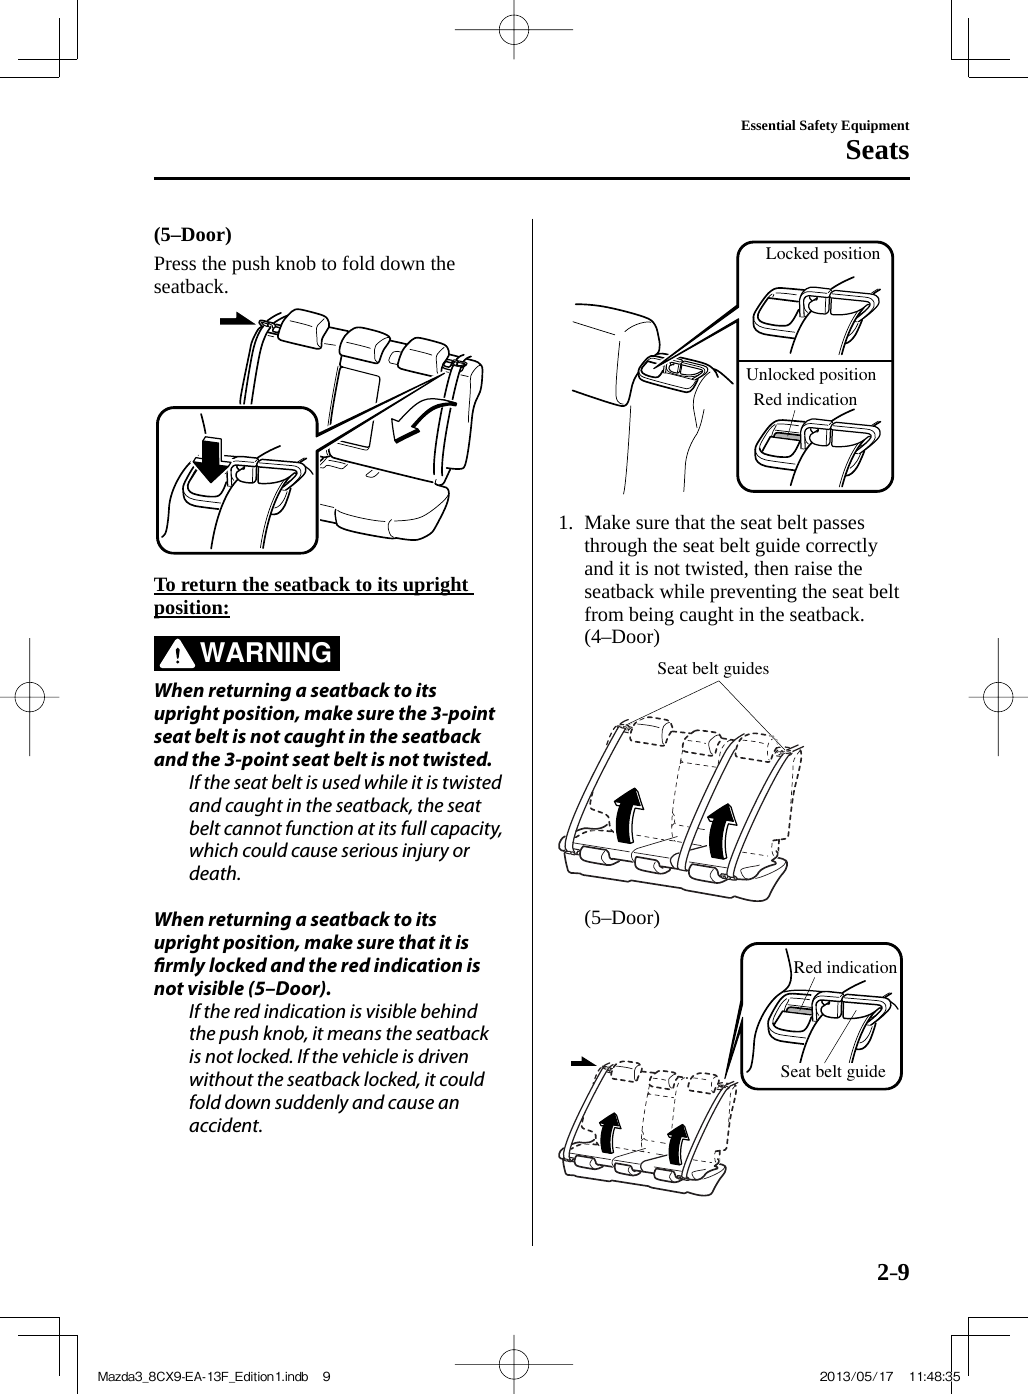 2–9Essential Safety EquipmentSeats  (5–Door)    Press the push knob to fold down the seatback.       To return the seatback to its upright position:     WARNING    When returning a seatback to its upright position, make sure the 3-point seat belt is not caught in the seatback and the 3-point seat belt is not twisted.  If the seat belt is used while it is twisted and caught in the seatback, the seat belt cannot function at its full capacity, which could cause serious injury or death.    When returning a seatback to its upright position, make sure that it is  rmly locked and the red indication is not visible (5–Door).  If the red indication is visible behind the push knob, it means the seatback is not locked. If the vehicle is driven without the seatback locked, it could fold down suddenly and cause an accident.   Locked positionUnlocked positionRed indication       1.   Make sure that the seat belt passes through the seat belt guide correctly and it is not twisted, then raise the seatback while preventing the seat belt from being caught in the seatback.    (4–Door)   Seat belt guides     (5–Door)   Red indicationSeat belt guide    Mazda3_8CX9-EA-13F_Edition1.indb   9Mazda3_8CX9-EA-13F_Edition1.indb   9 2013/05/17   11:48:352013/05/17   11:48:35